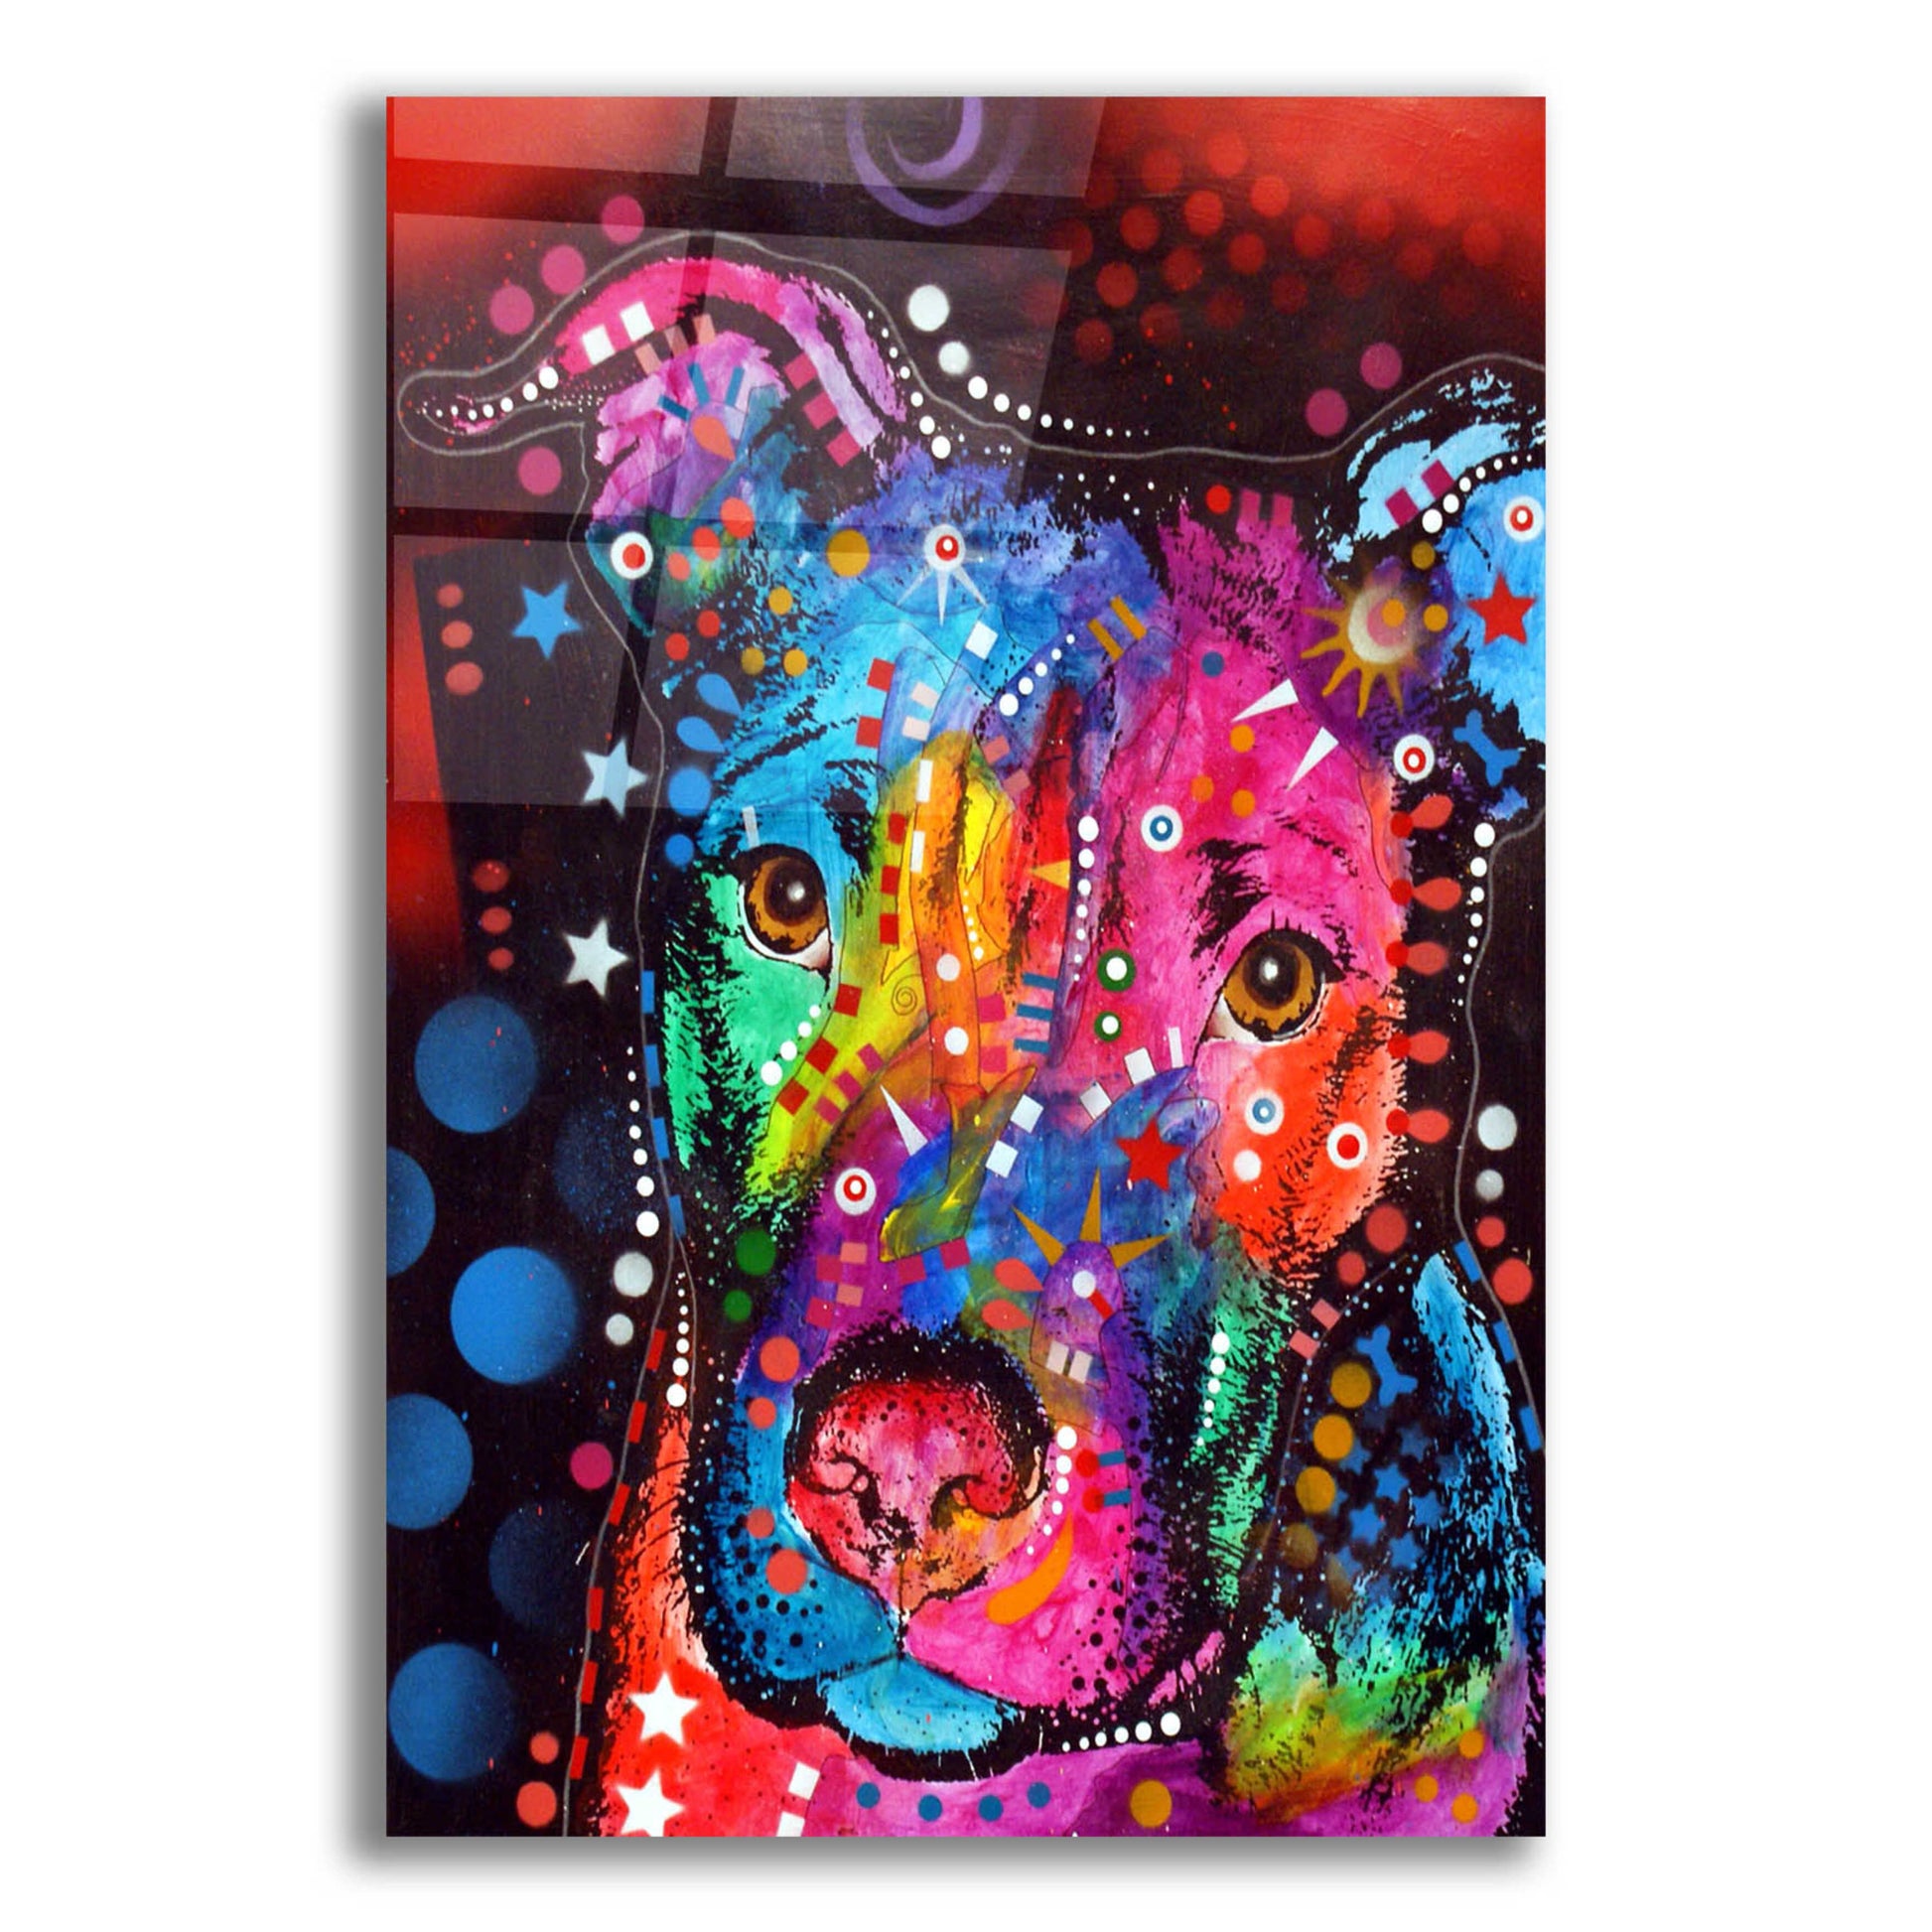 Epic Art 'Young Bull 120610' by Dean Russo, Acrylic Glass Wall Art